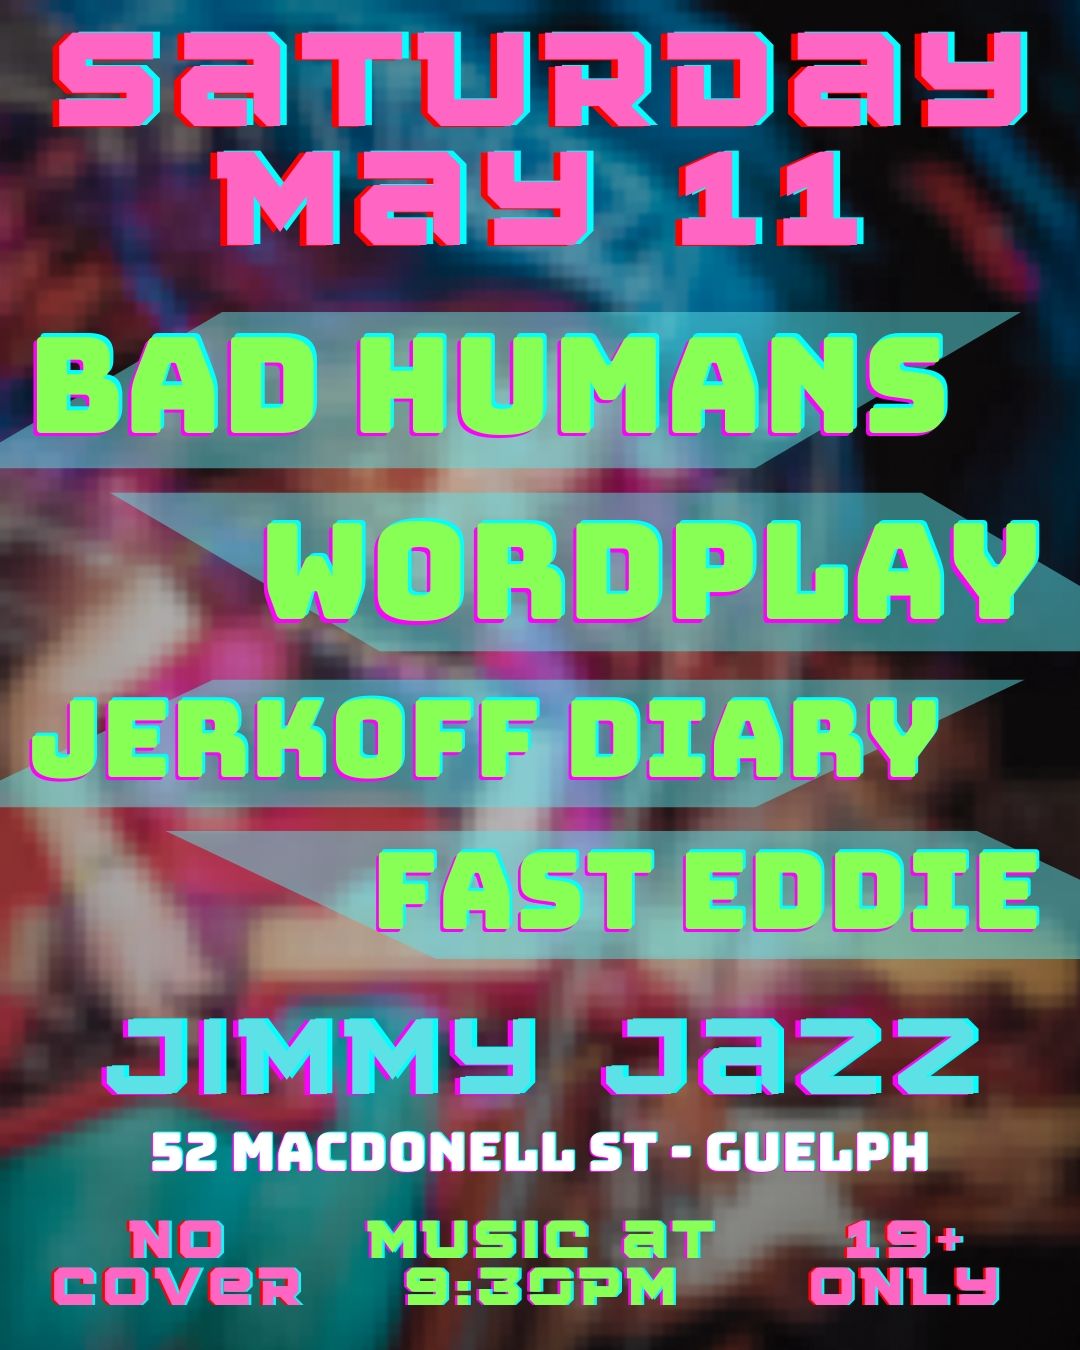 Bad Humans, Wordplay, Jerkoff Diary & Fast Eddie - Guelph (FREE SHOW)